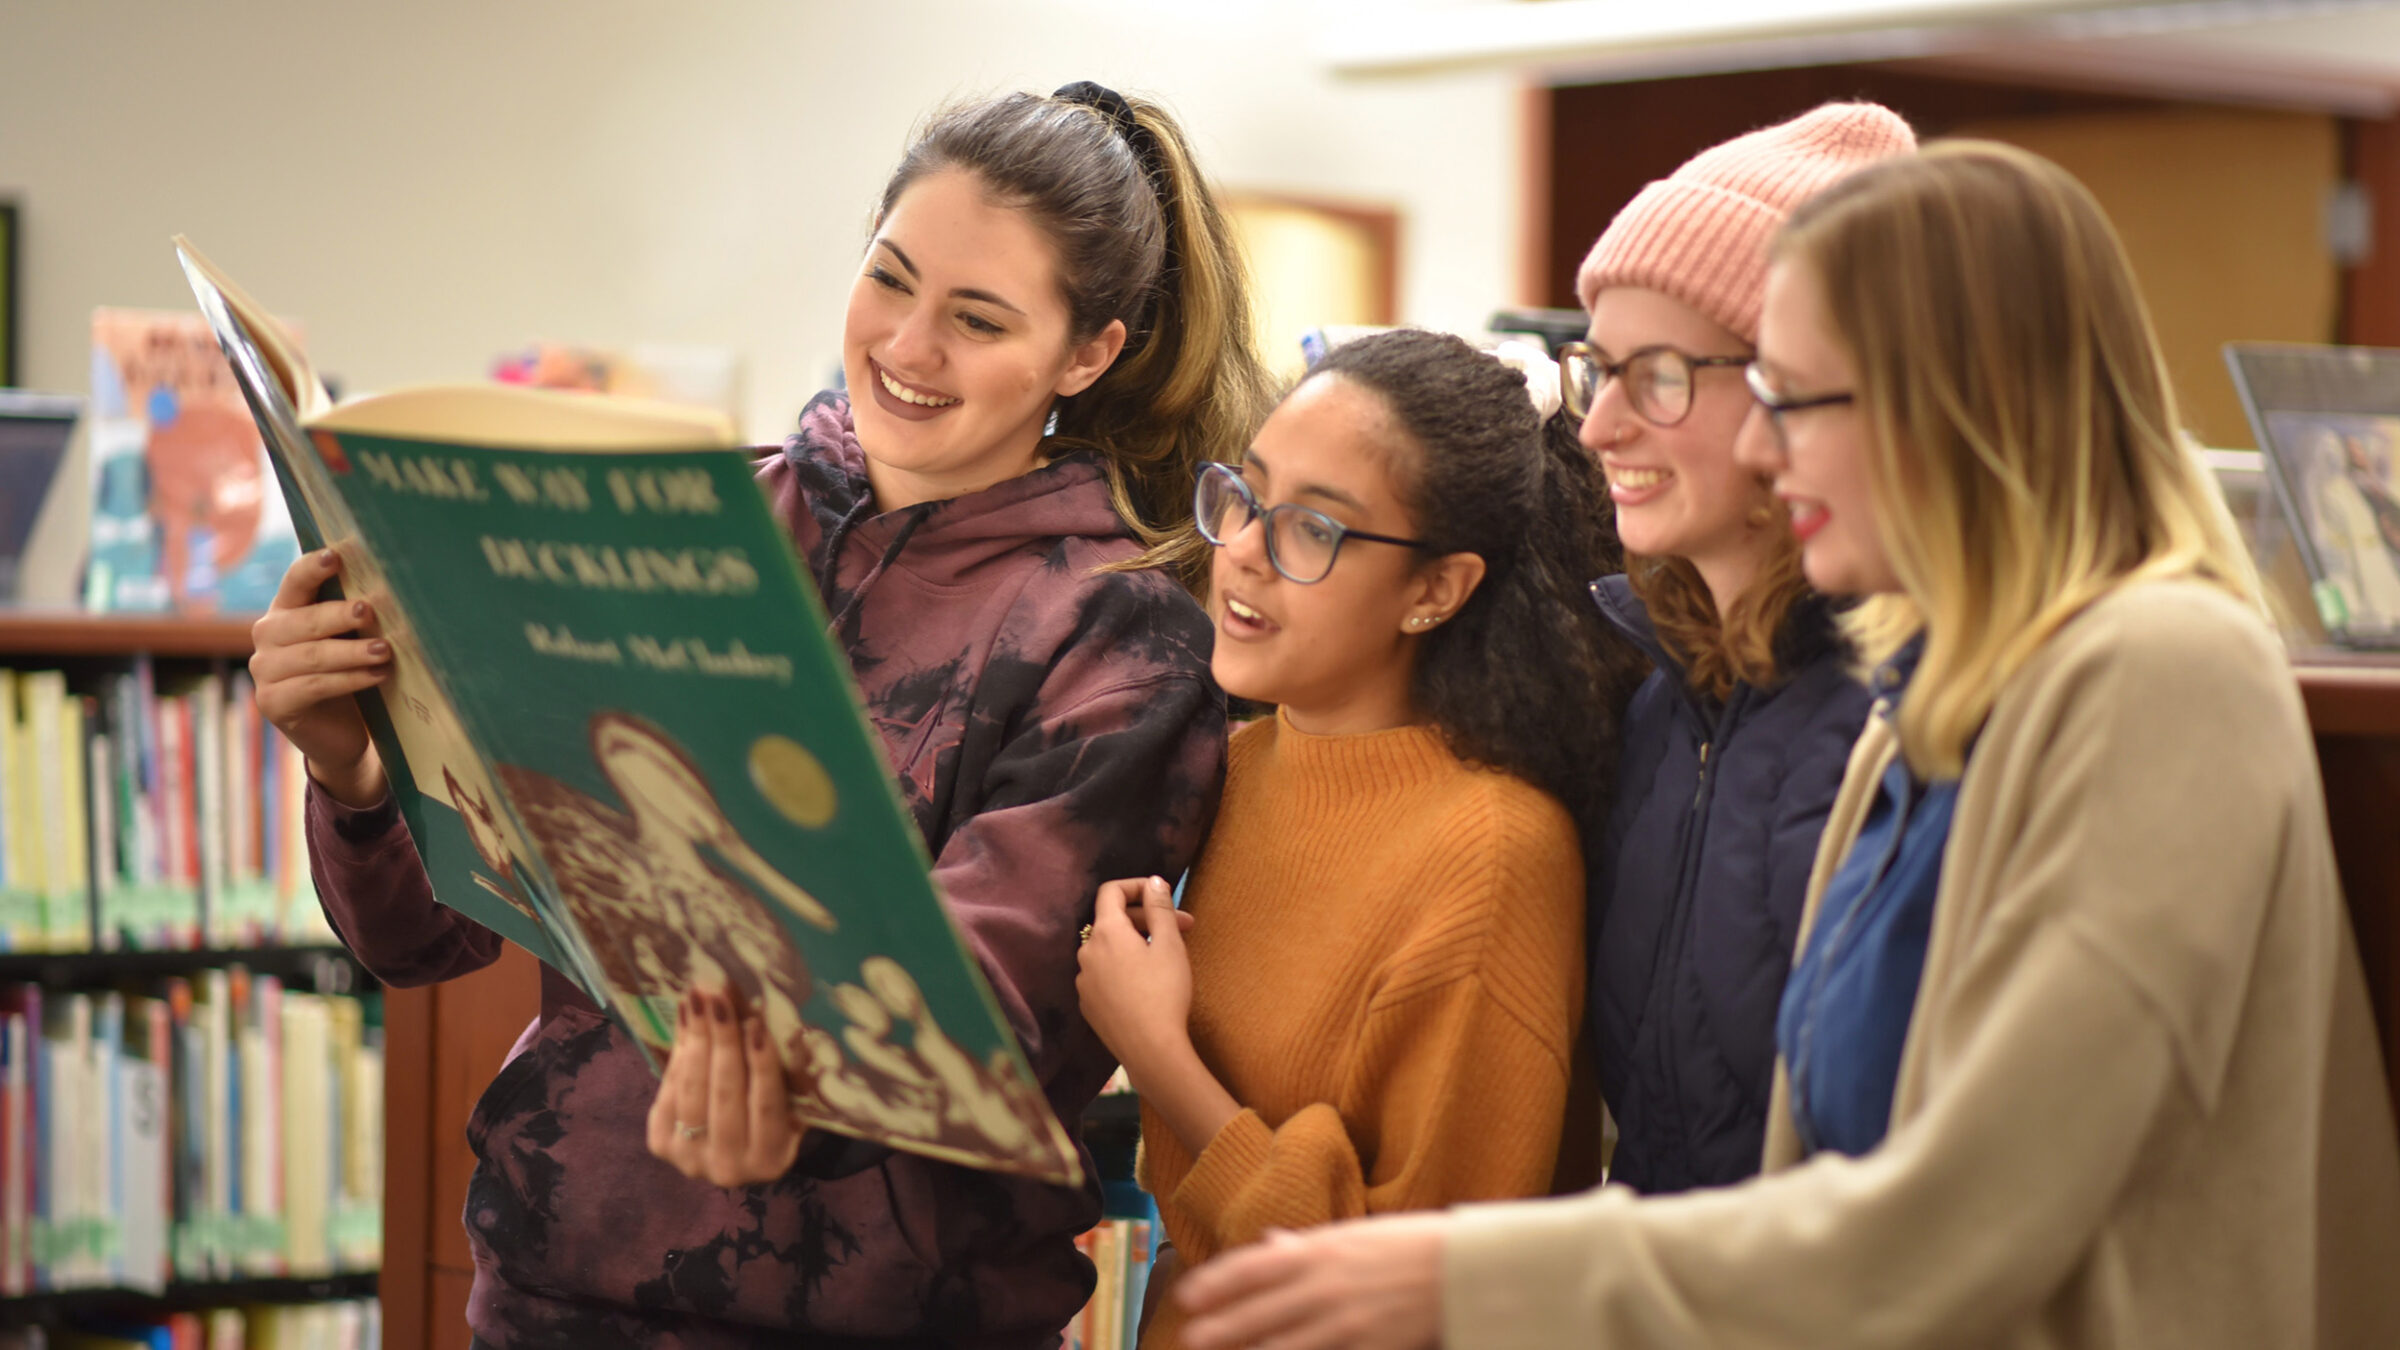 group of students looking at an oversized children's book